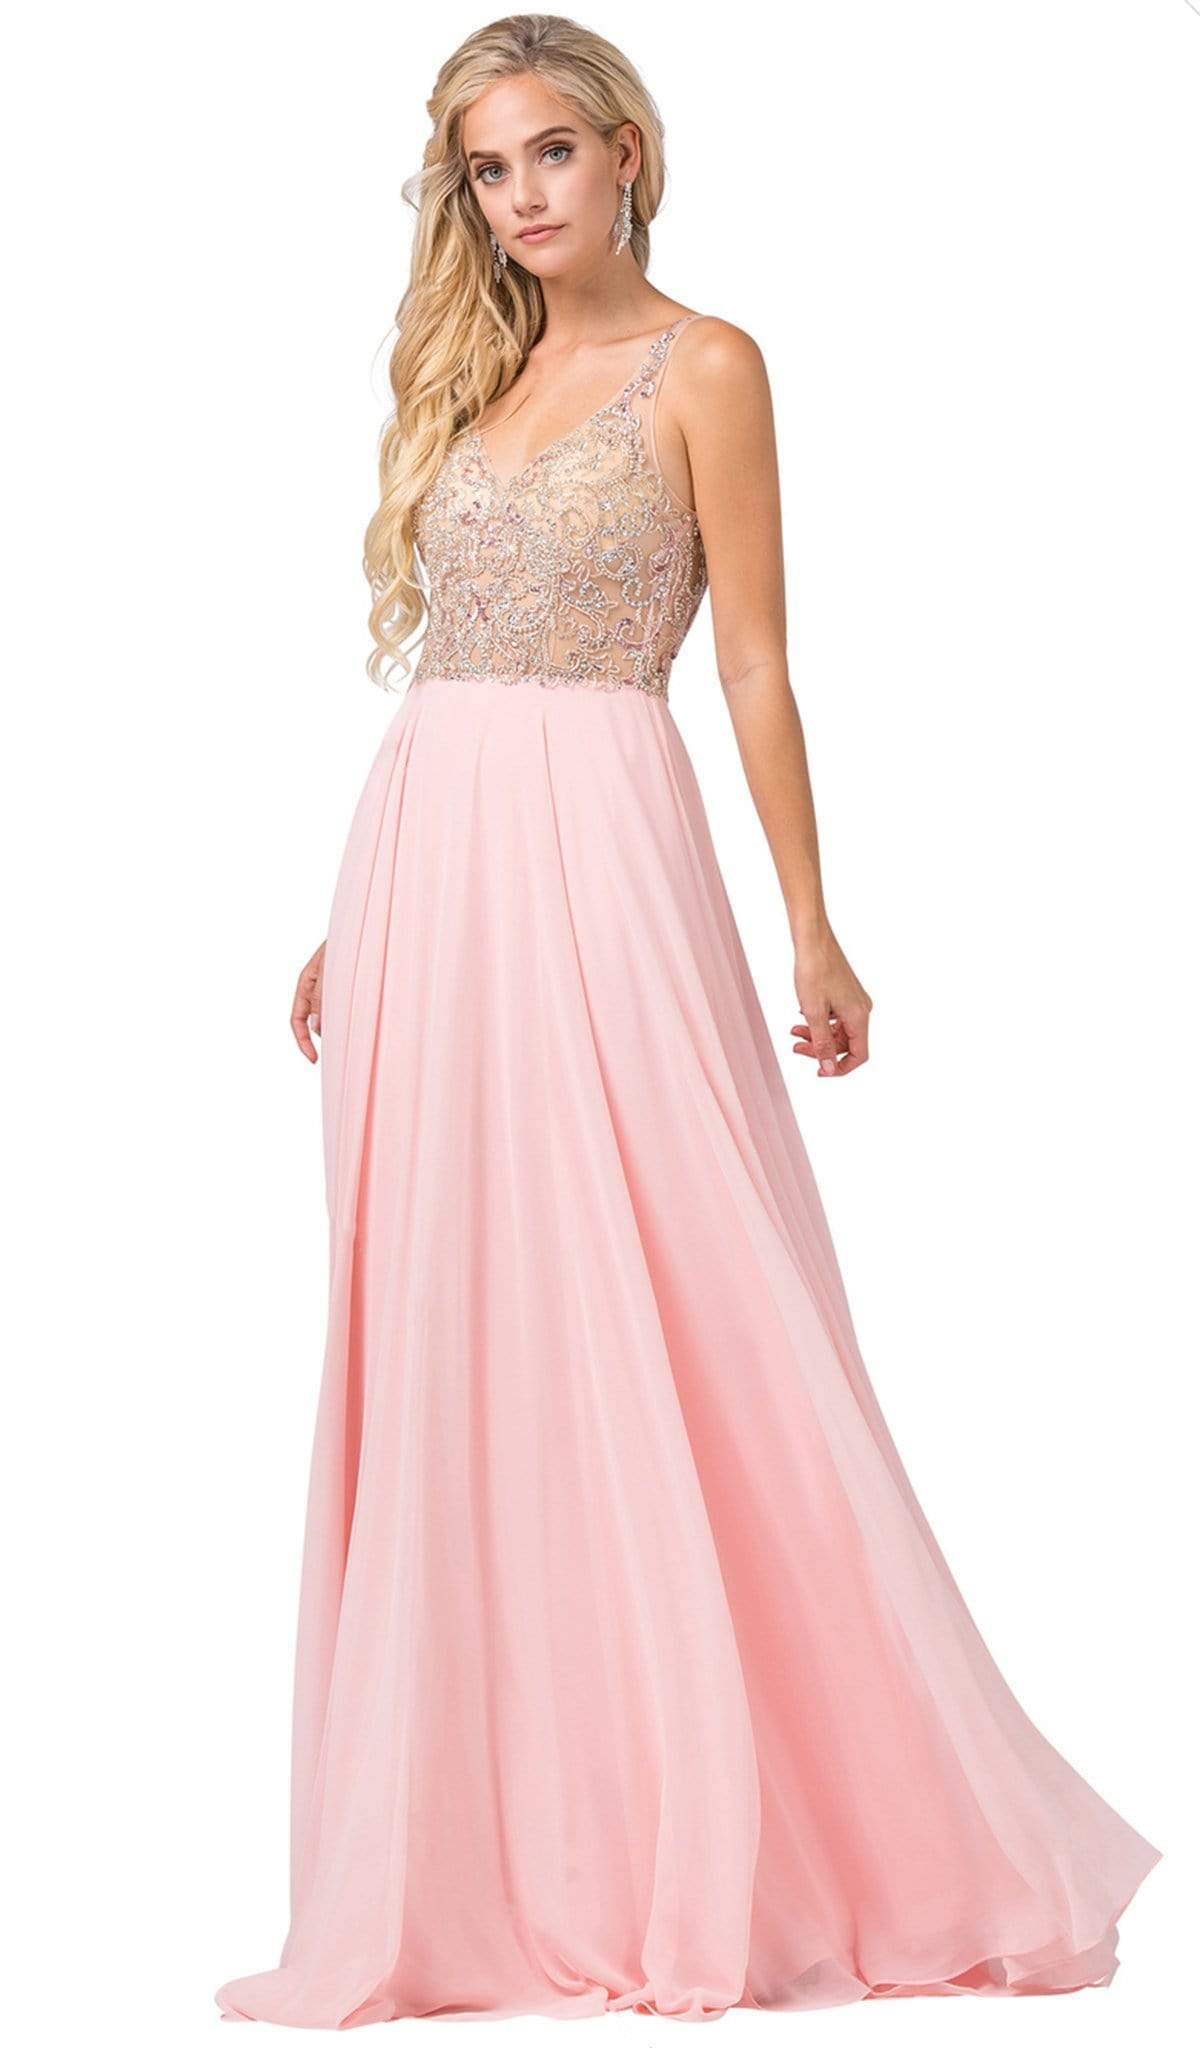 Dancing Queen - 2513 Beaded Embellished Illusion Bodice Chiffon Gown